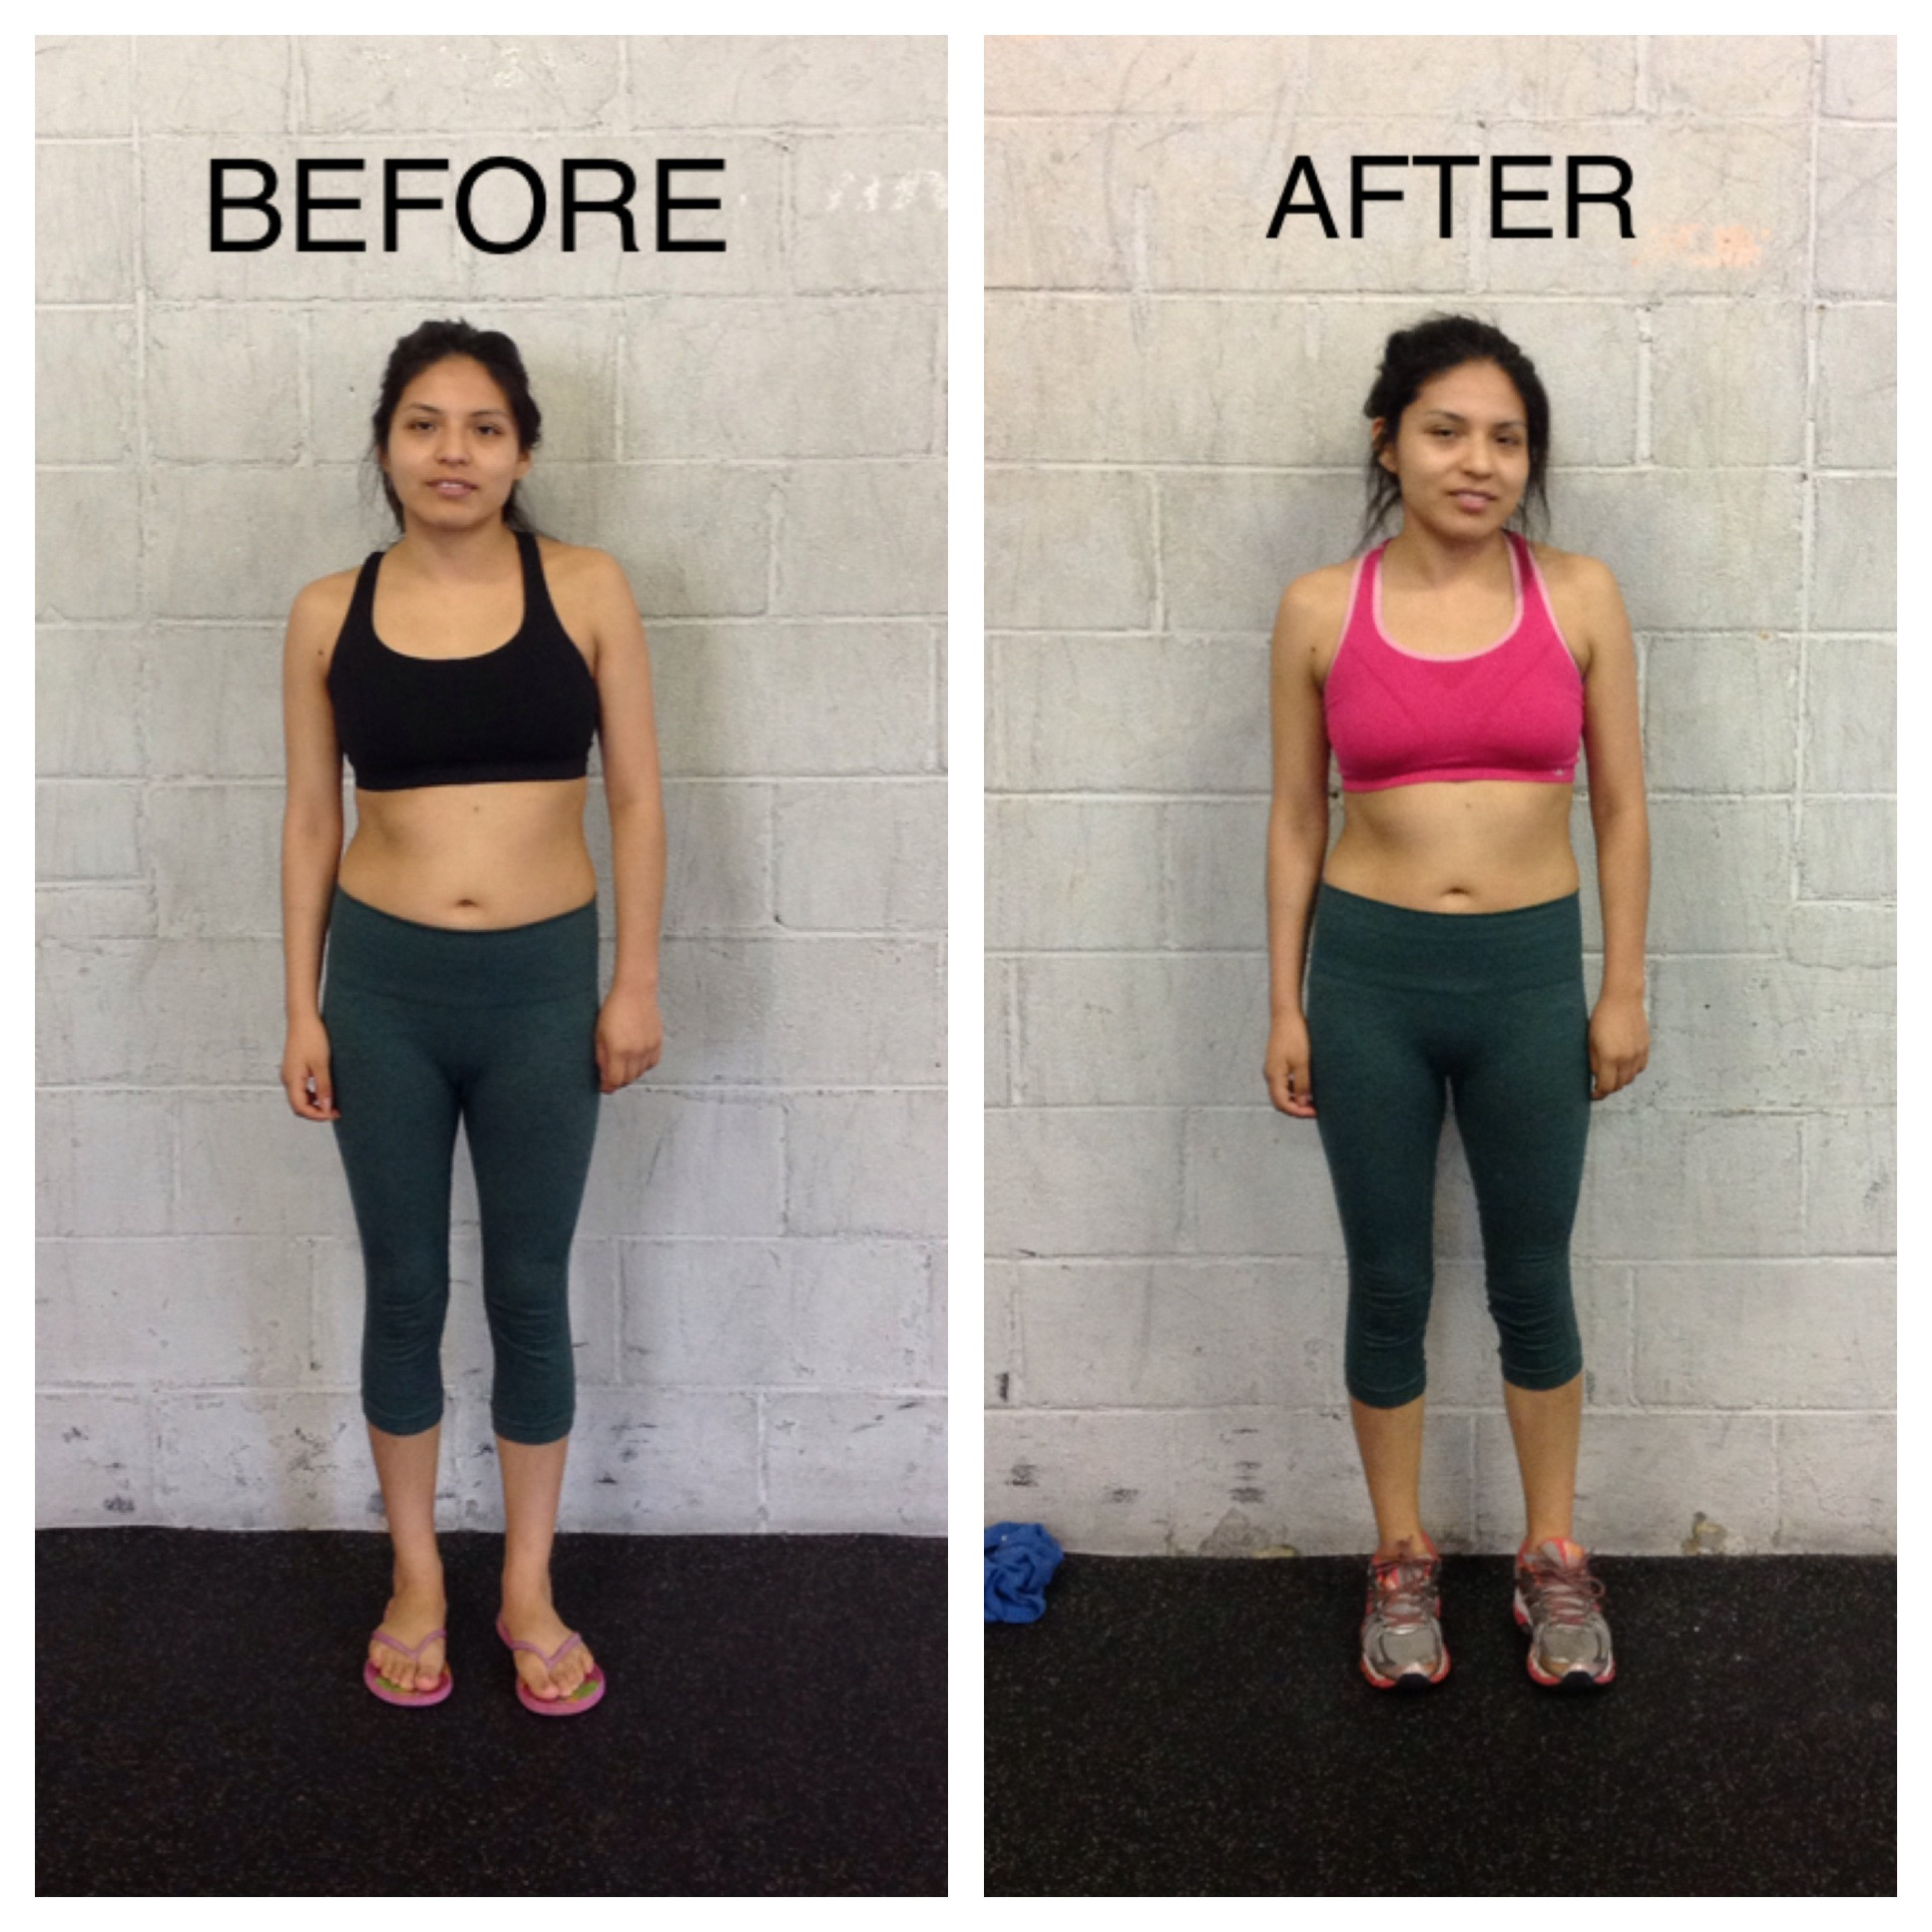 Paleo Diet Before And After
 Spring 2015 Nutrition Challenge Results Before and After